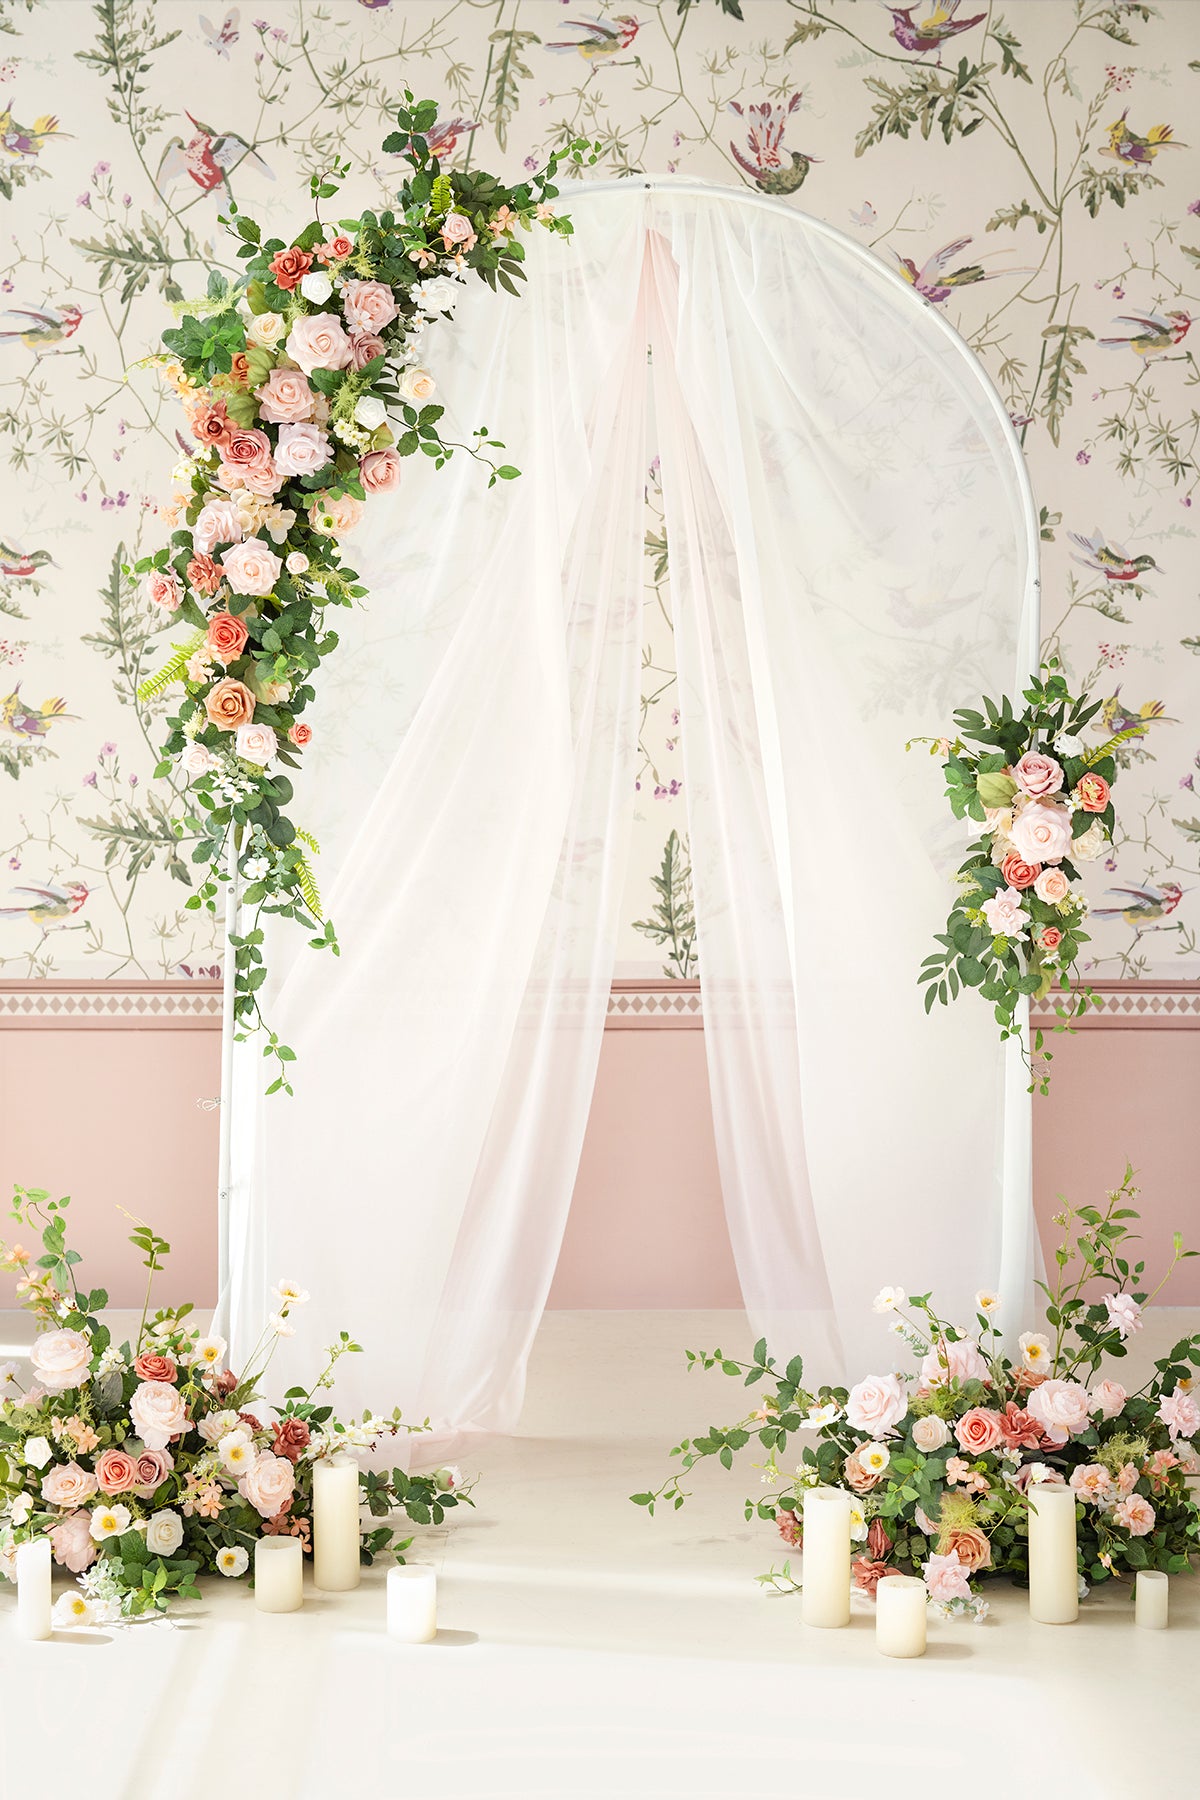 Flower Arch Decor with Drapes in Garden Blush